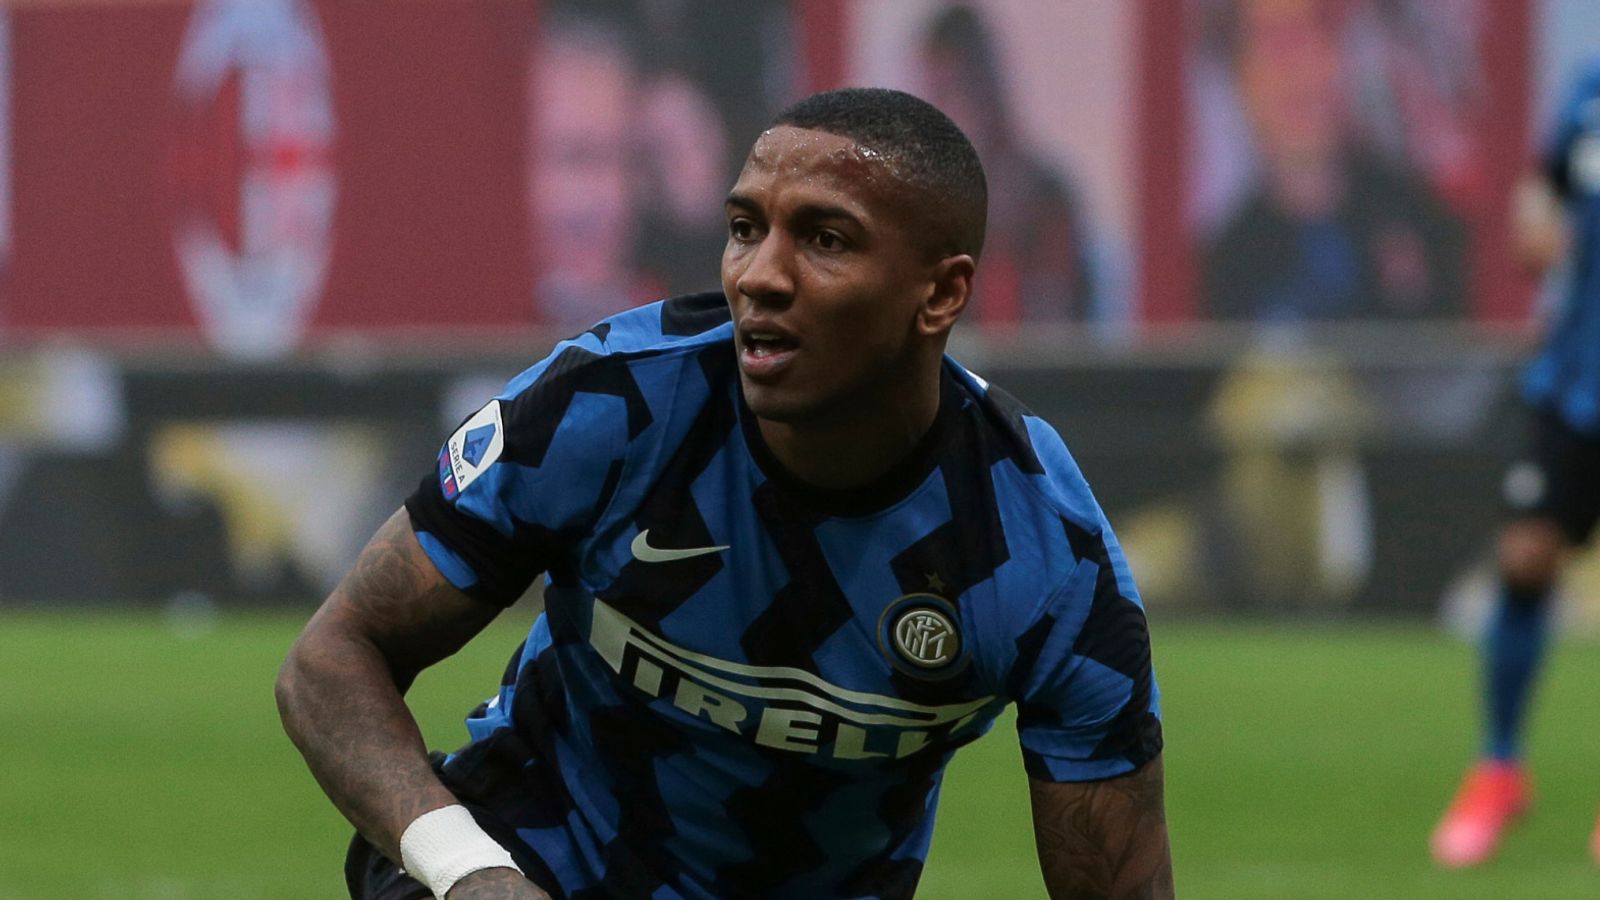 Ashley Young finalising move to Aston Villa from Inter Milan on free transfer